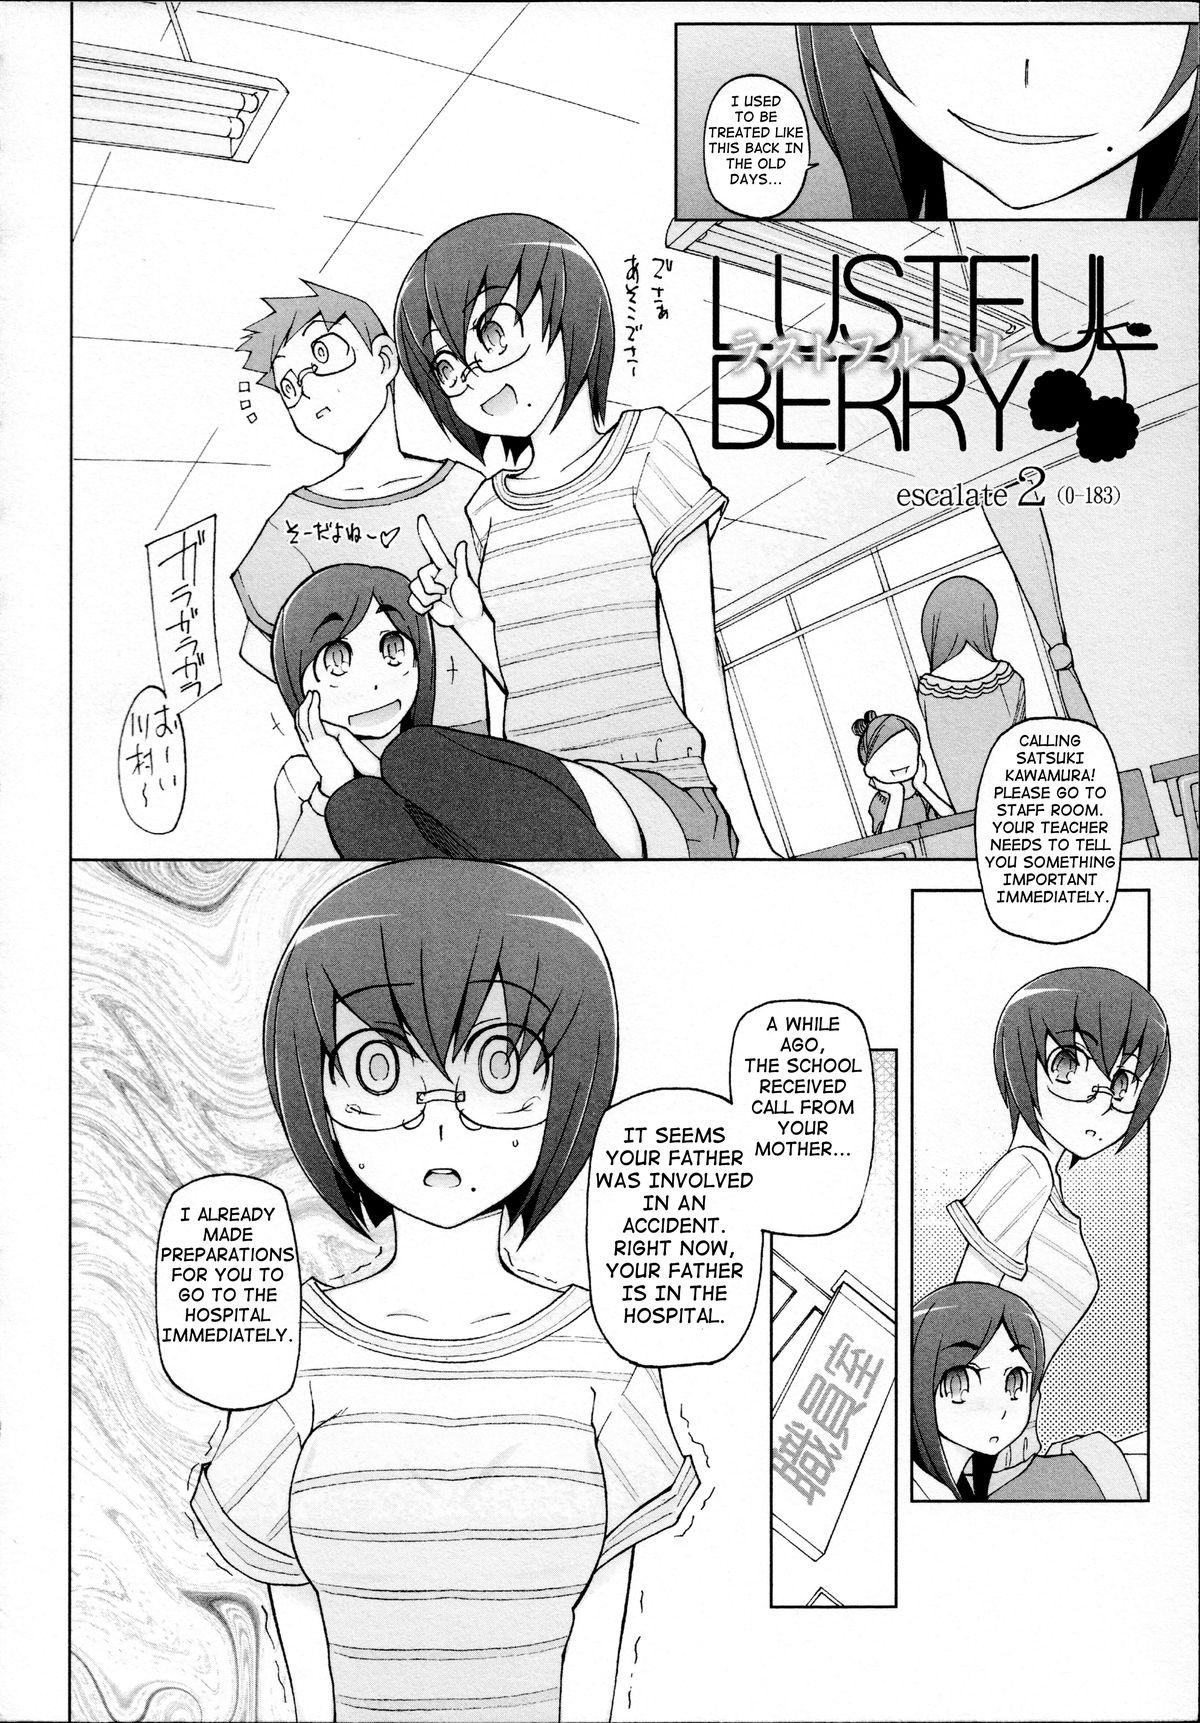 LUSTFUL BERRY Chapter 1-4 39